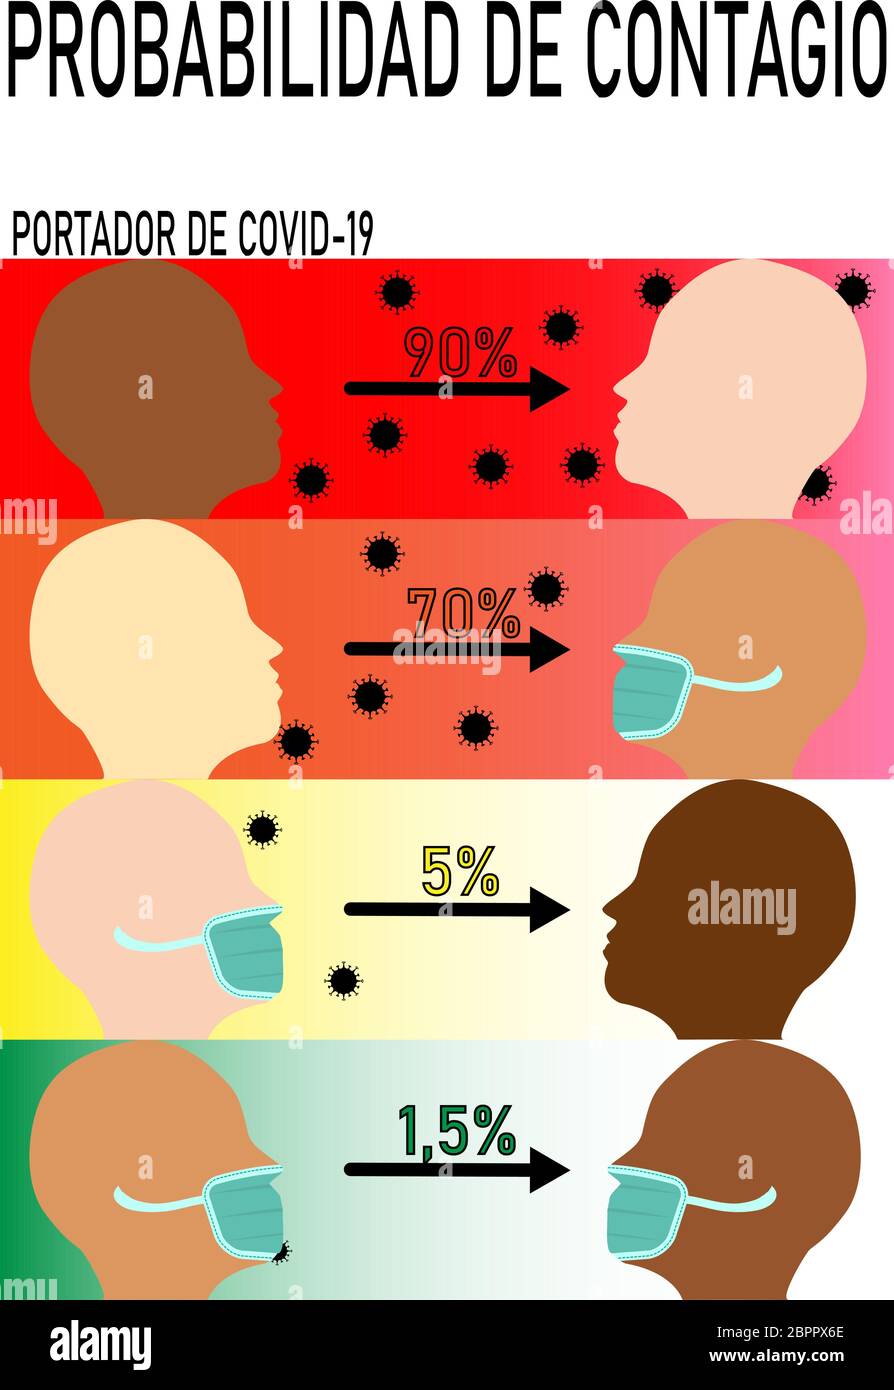 Vector illustration of transmission probability of Covid-19 (in percent) wearing or not protective mask.  Profile of multiracial people. In spanish. Stock Vector